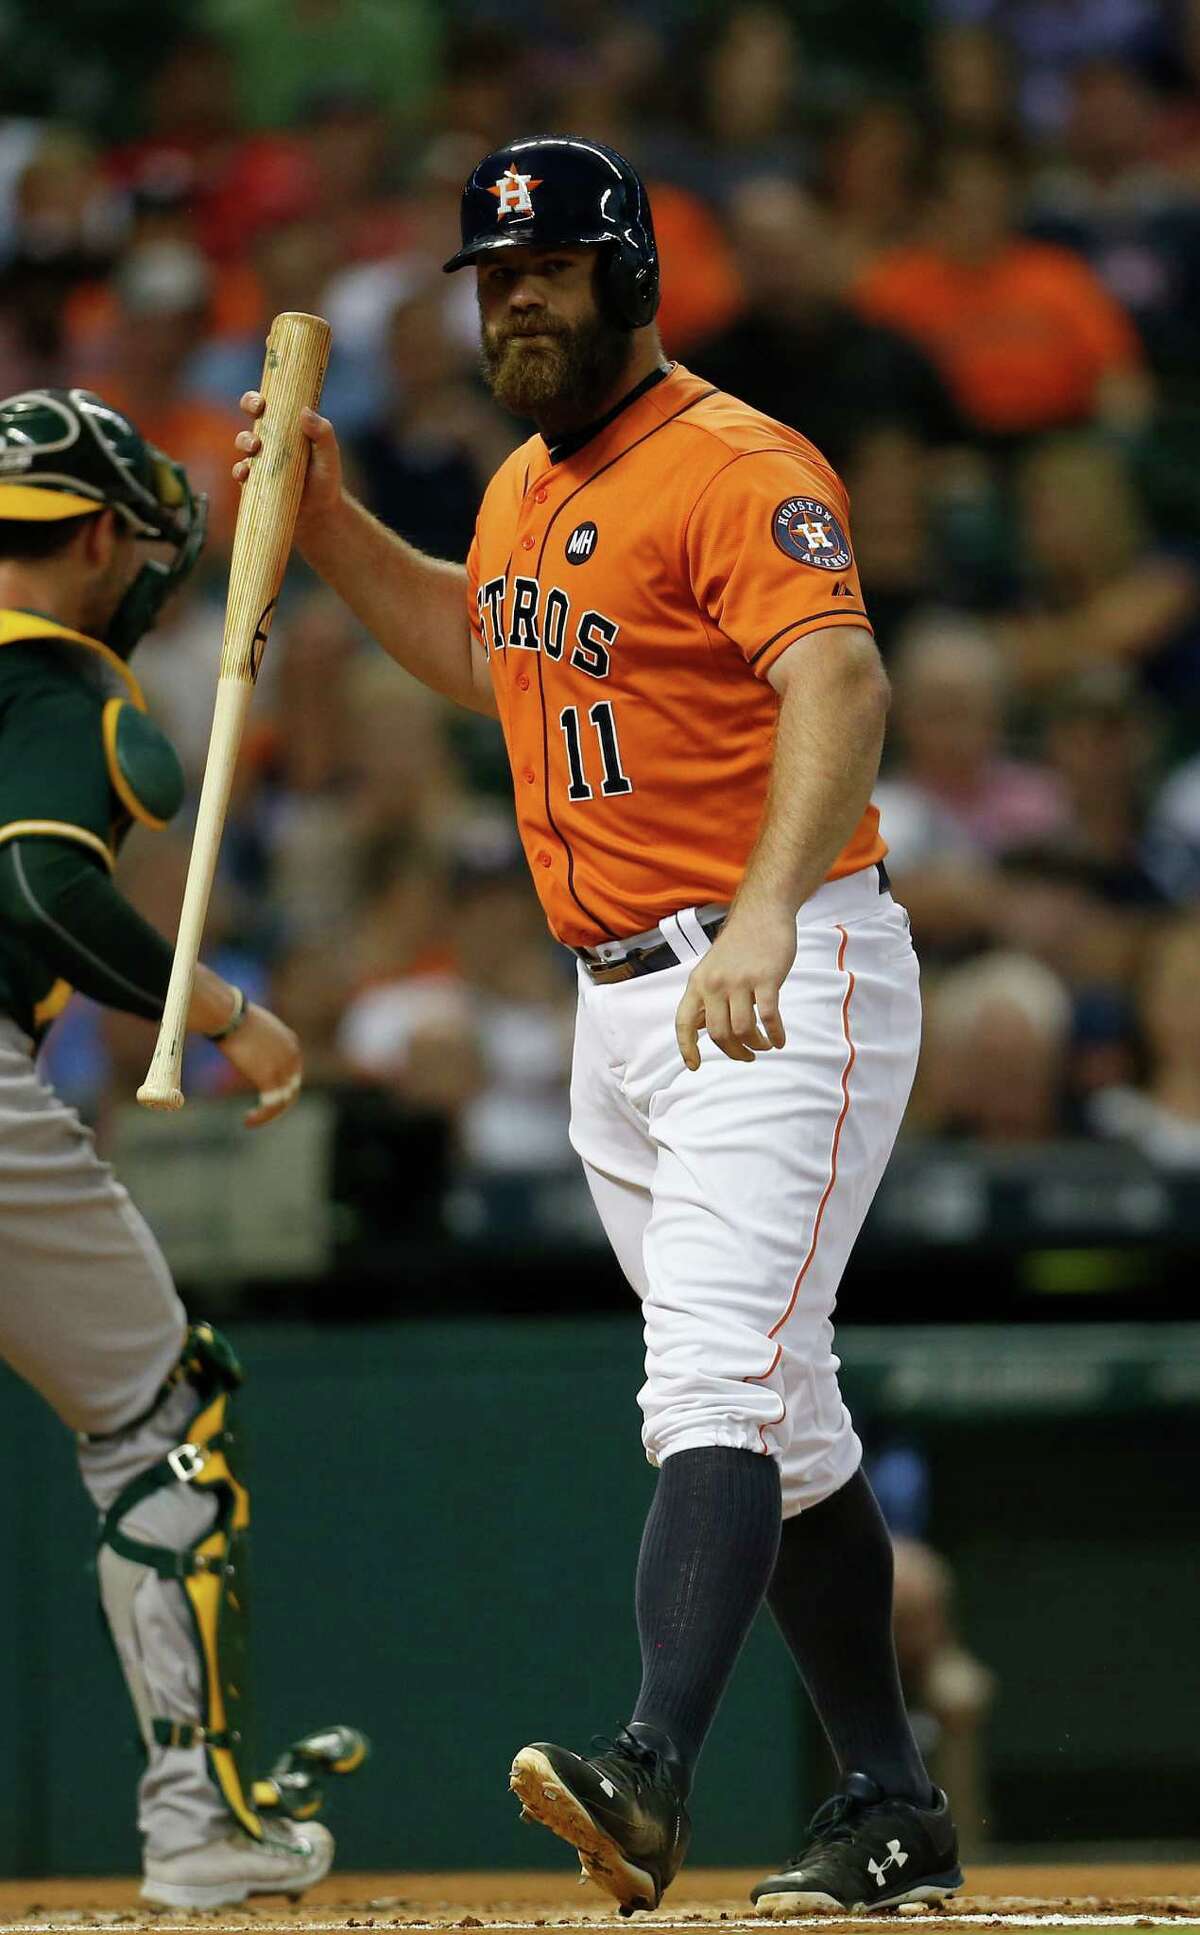 The look of despair displayed by designated hitter Evan Gattis on Friday has been a common sight among Astros batters during a 4-12 September skid.